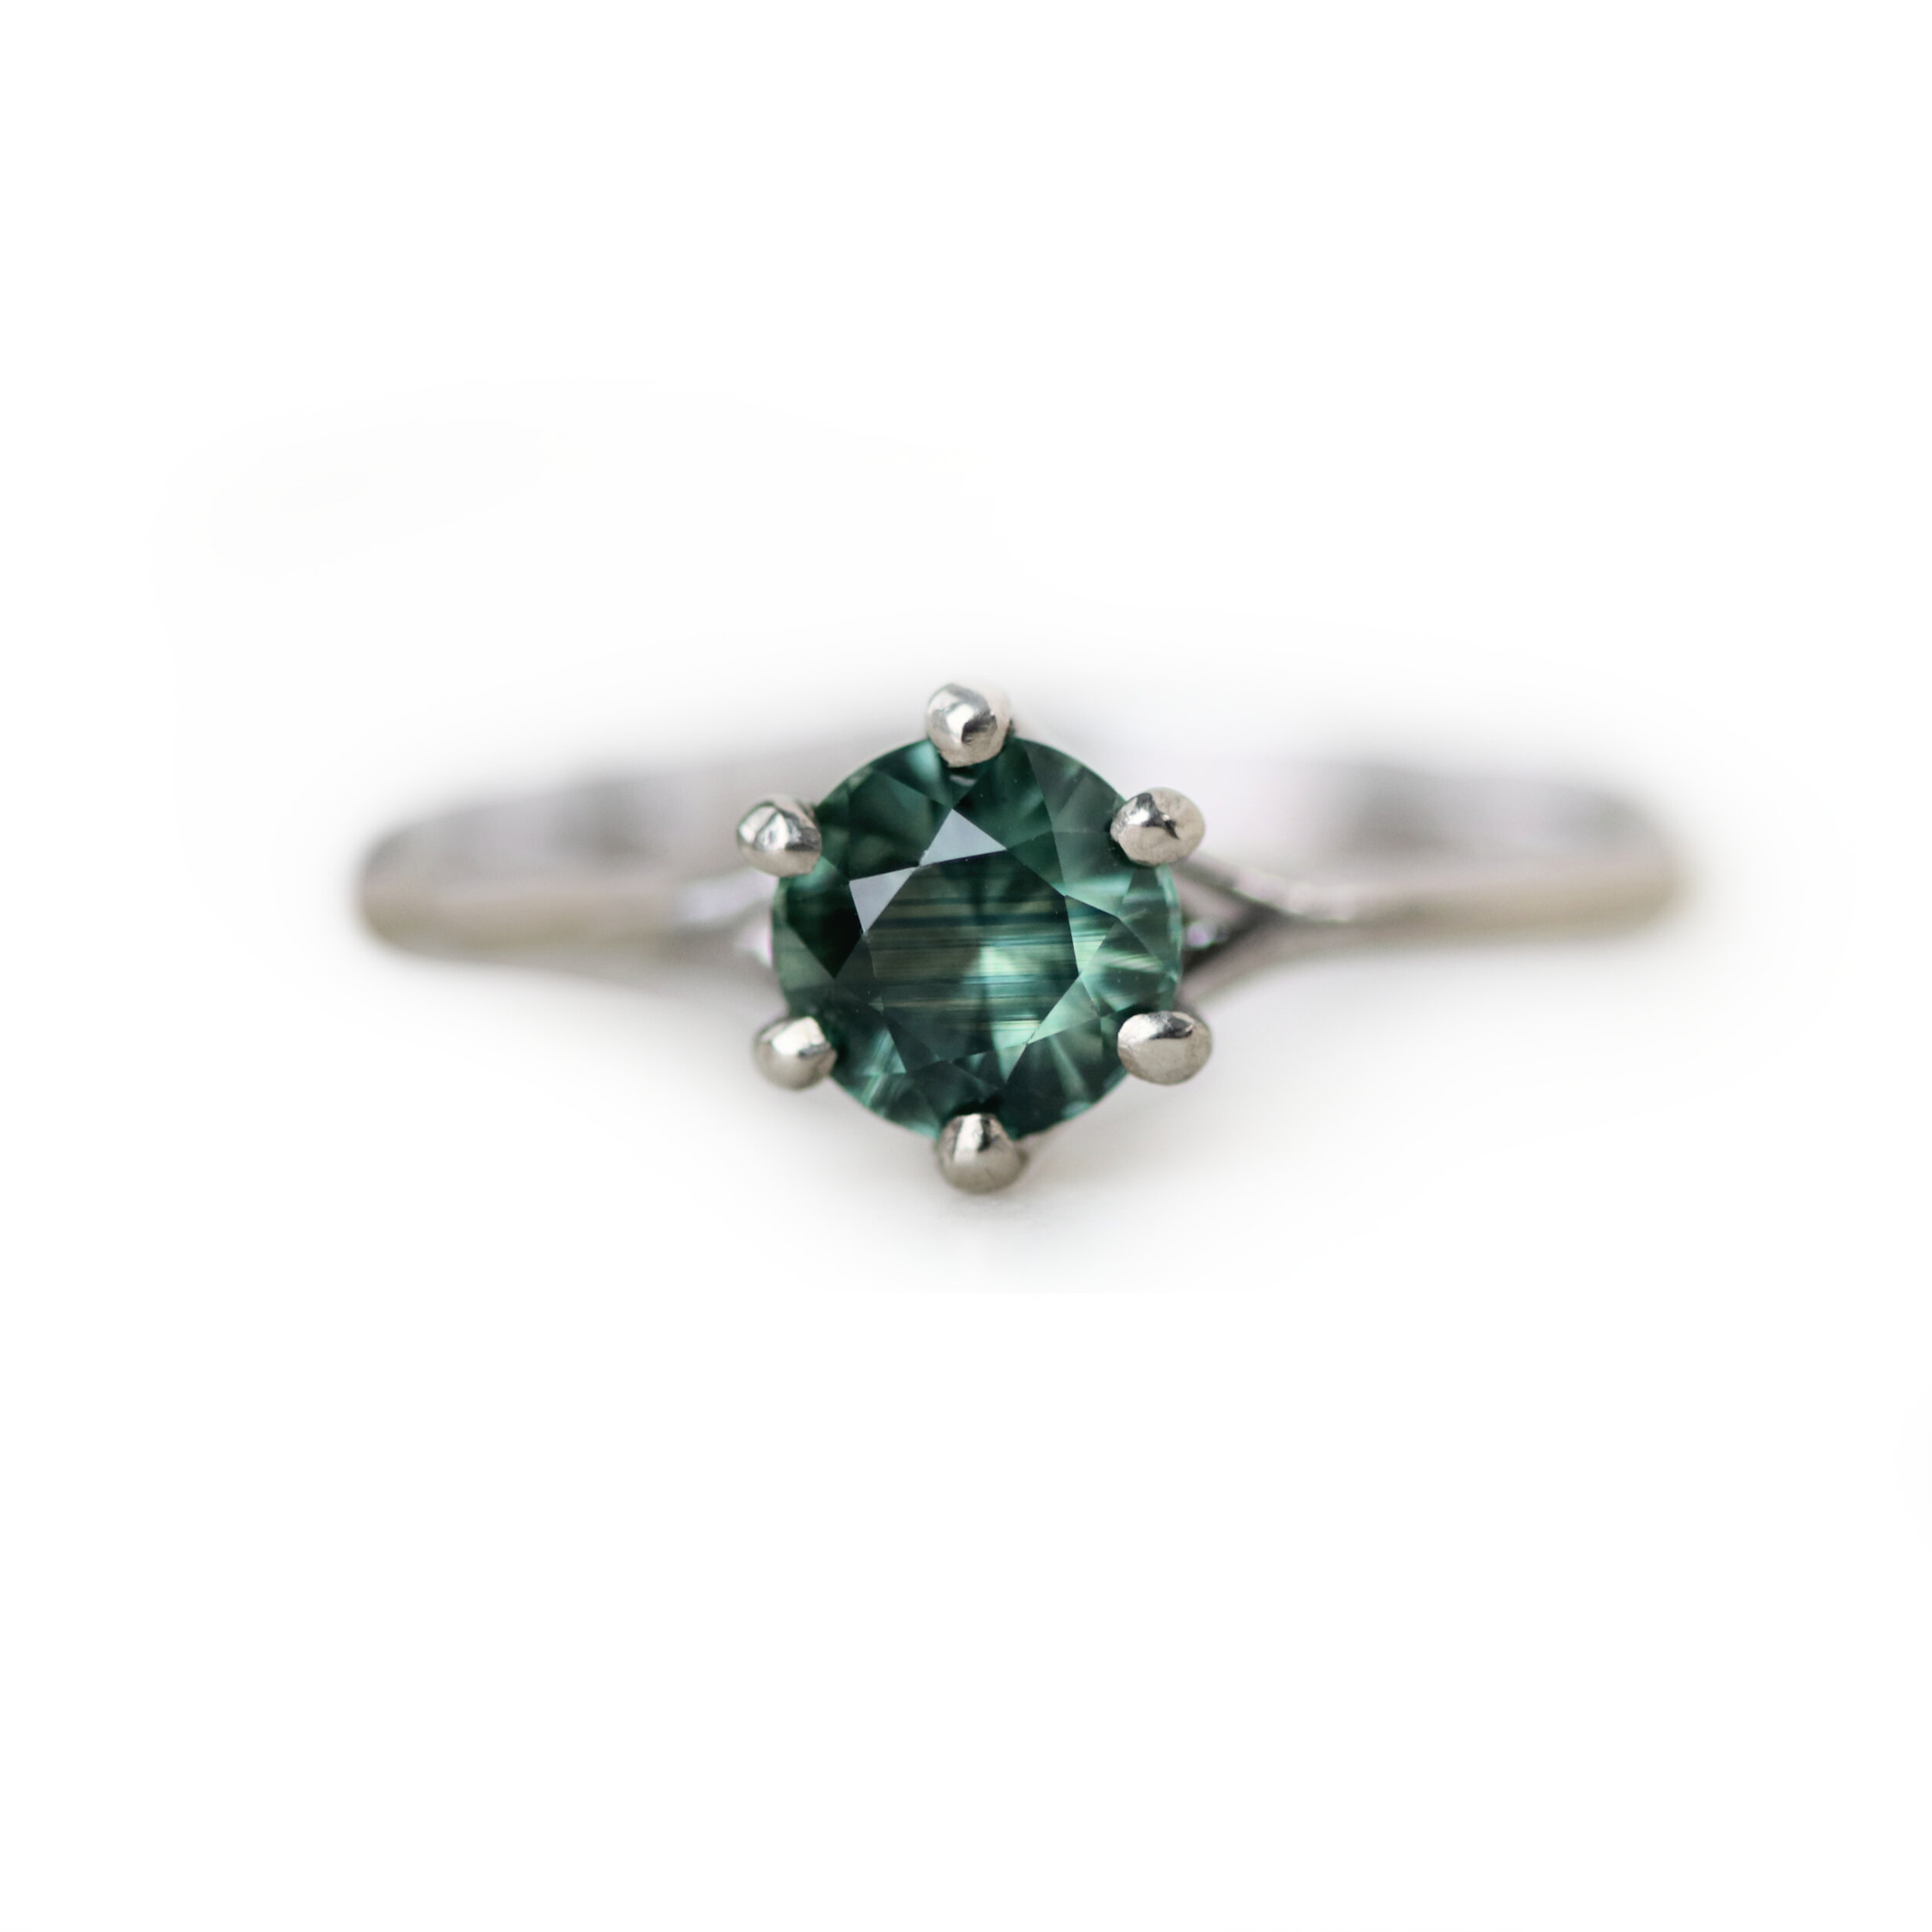 ENGAGEMENT RINGS — Katie Carder